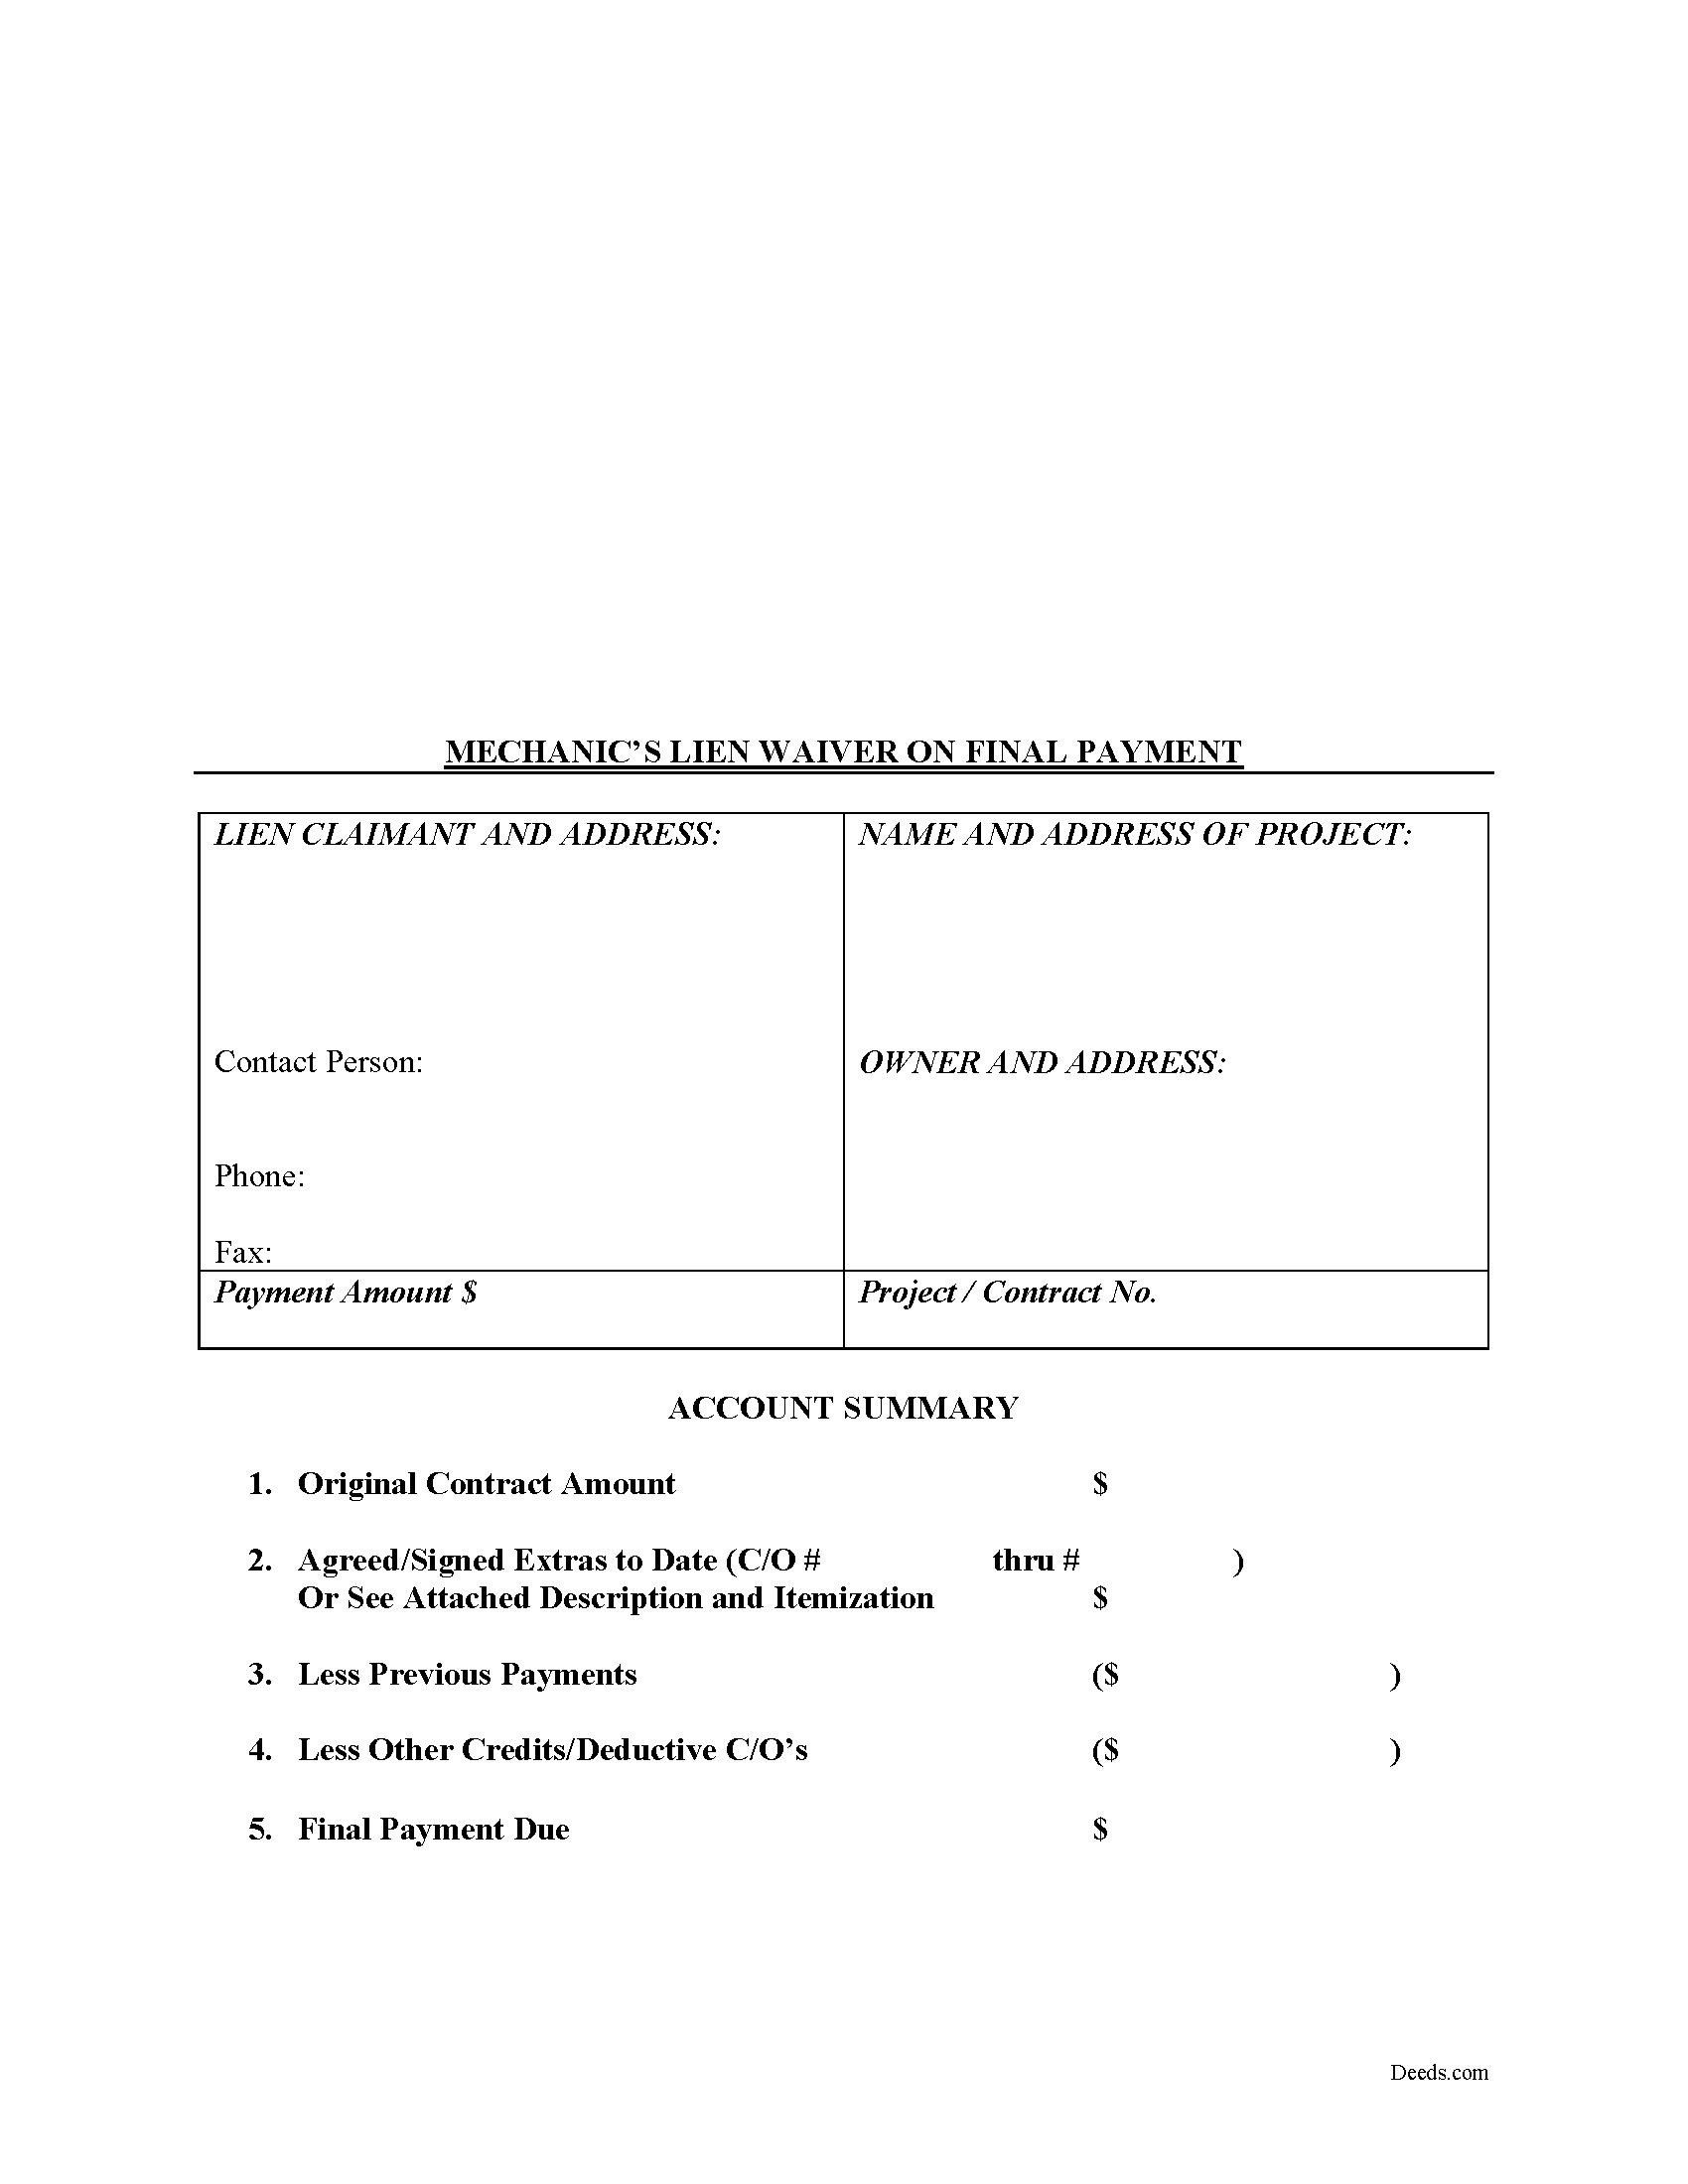 Mechanic's Lien Waiver on Final Payment Form